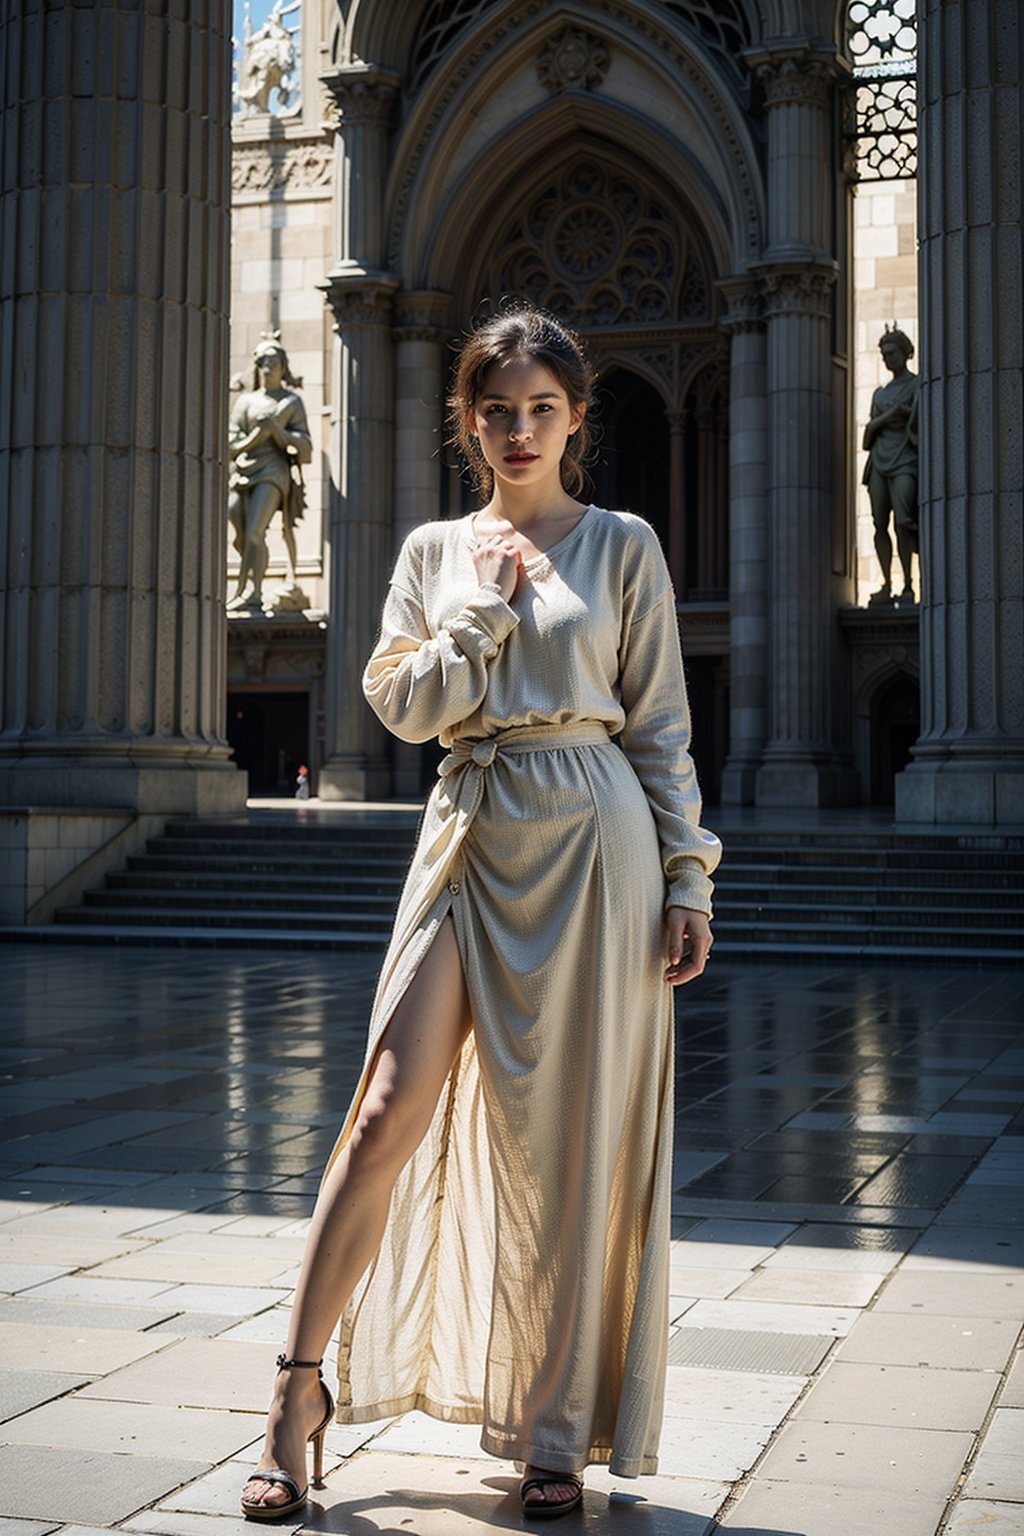 Full-body shot of Sayaka Yumi standing confidently in front of Notre-Dame de Paris's iconic Gothic façade. Soft afternoon light casts a warm glow on her striking features, highlighting the contrast between her dynamic pose and the majestic architecture. She stands tall, exuding poise and style, with her outfit perfectly complementing her energetic yet refined presence. The ensemble, a blend of modern chic and timeless elegance, adds to her captivating aura as she takes center stage in front of the historic cathedral's imposing towers.